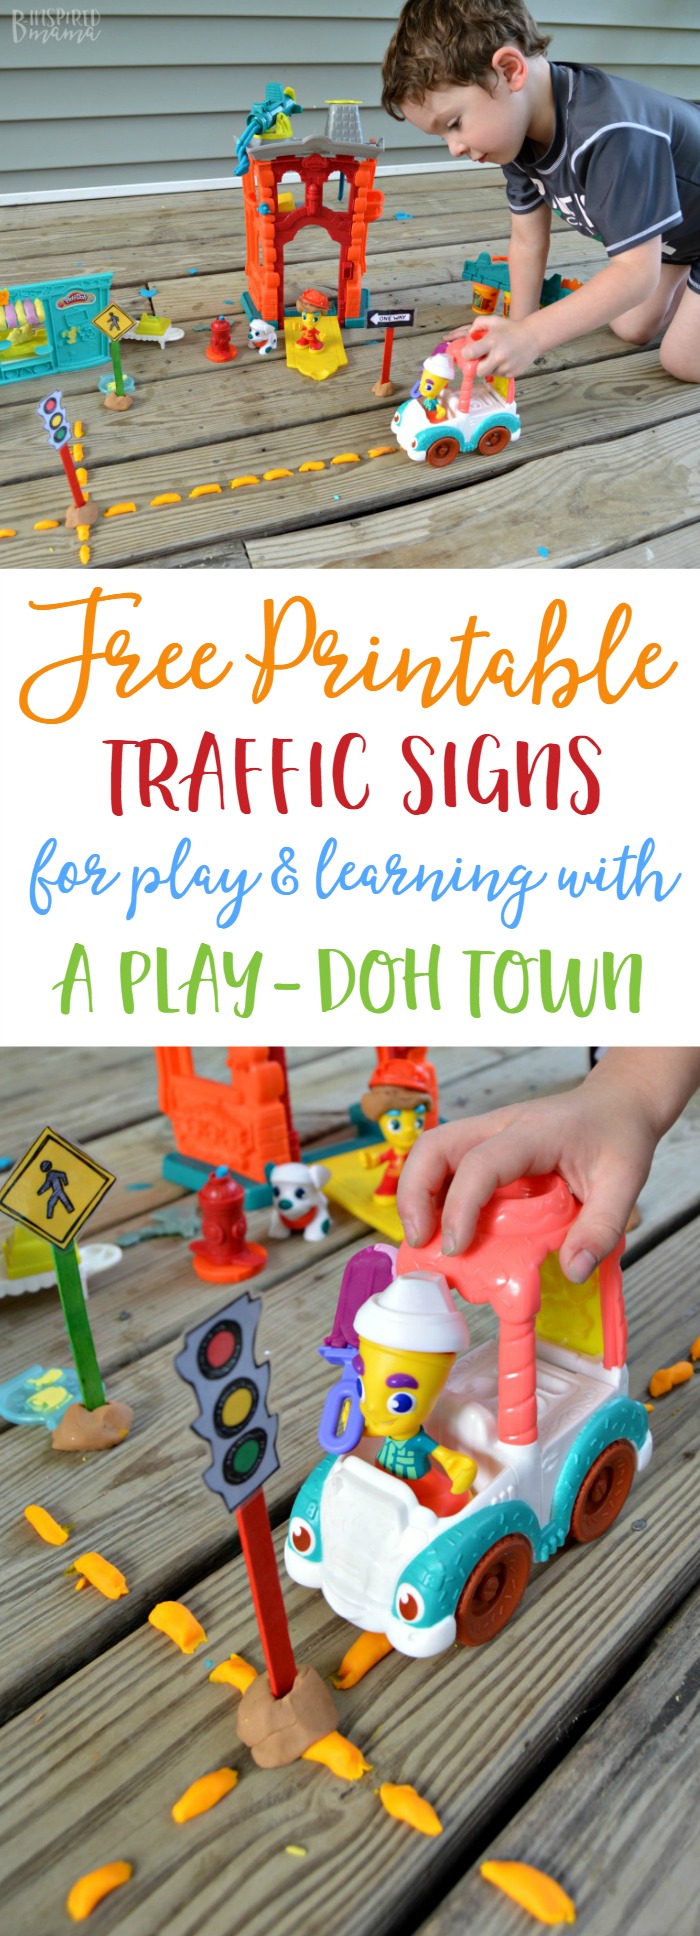 Free Printable Traffic Signs for Play and Learning - with PLAY-DOH Town Playsets - from B-Inspired Mama